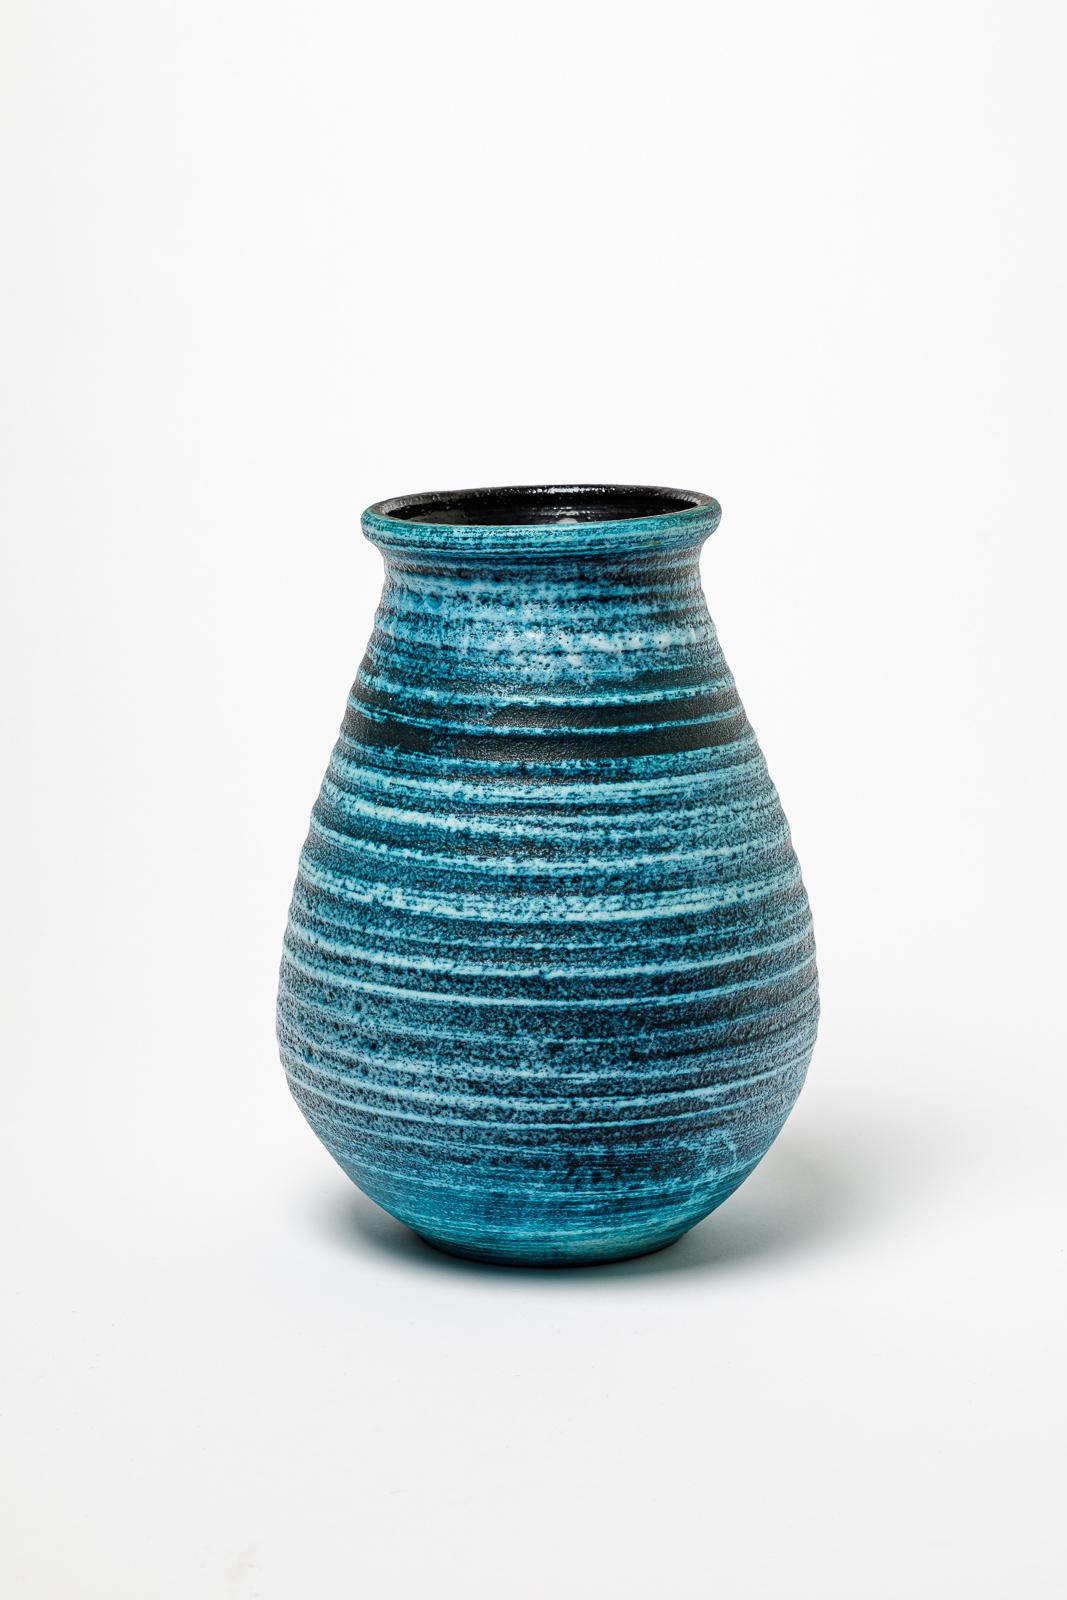 Beaux Arts Blue glazed ceramic vase by Accolay, circa 1960-1970. For Sale